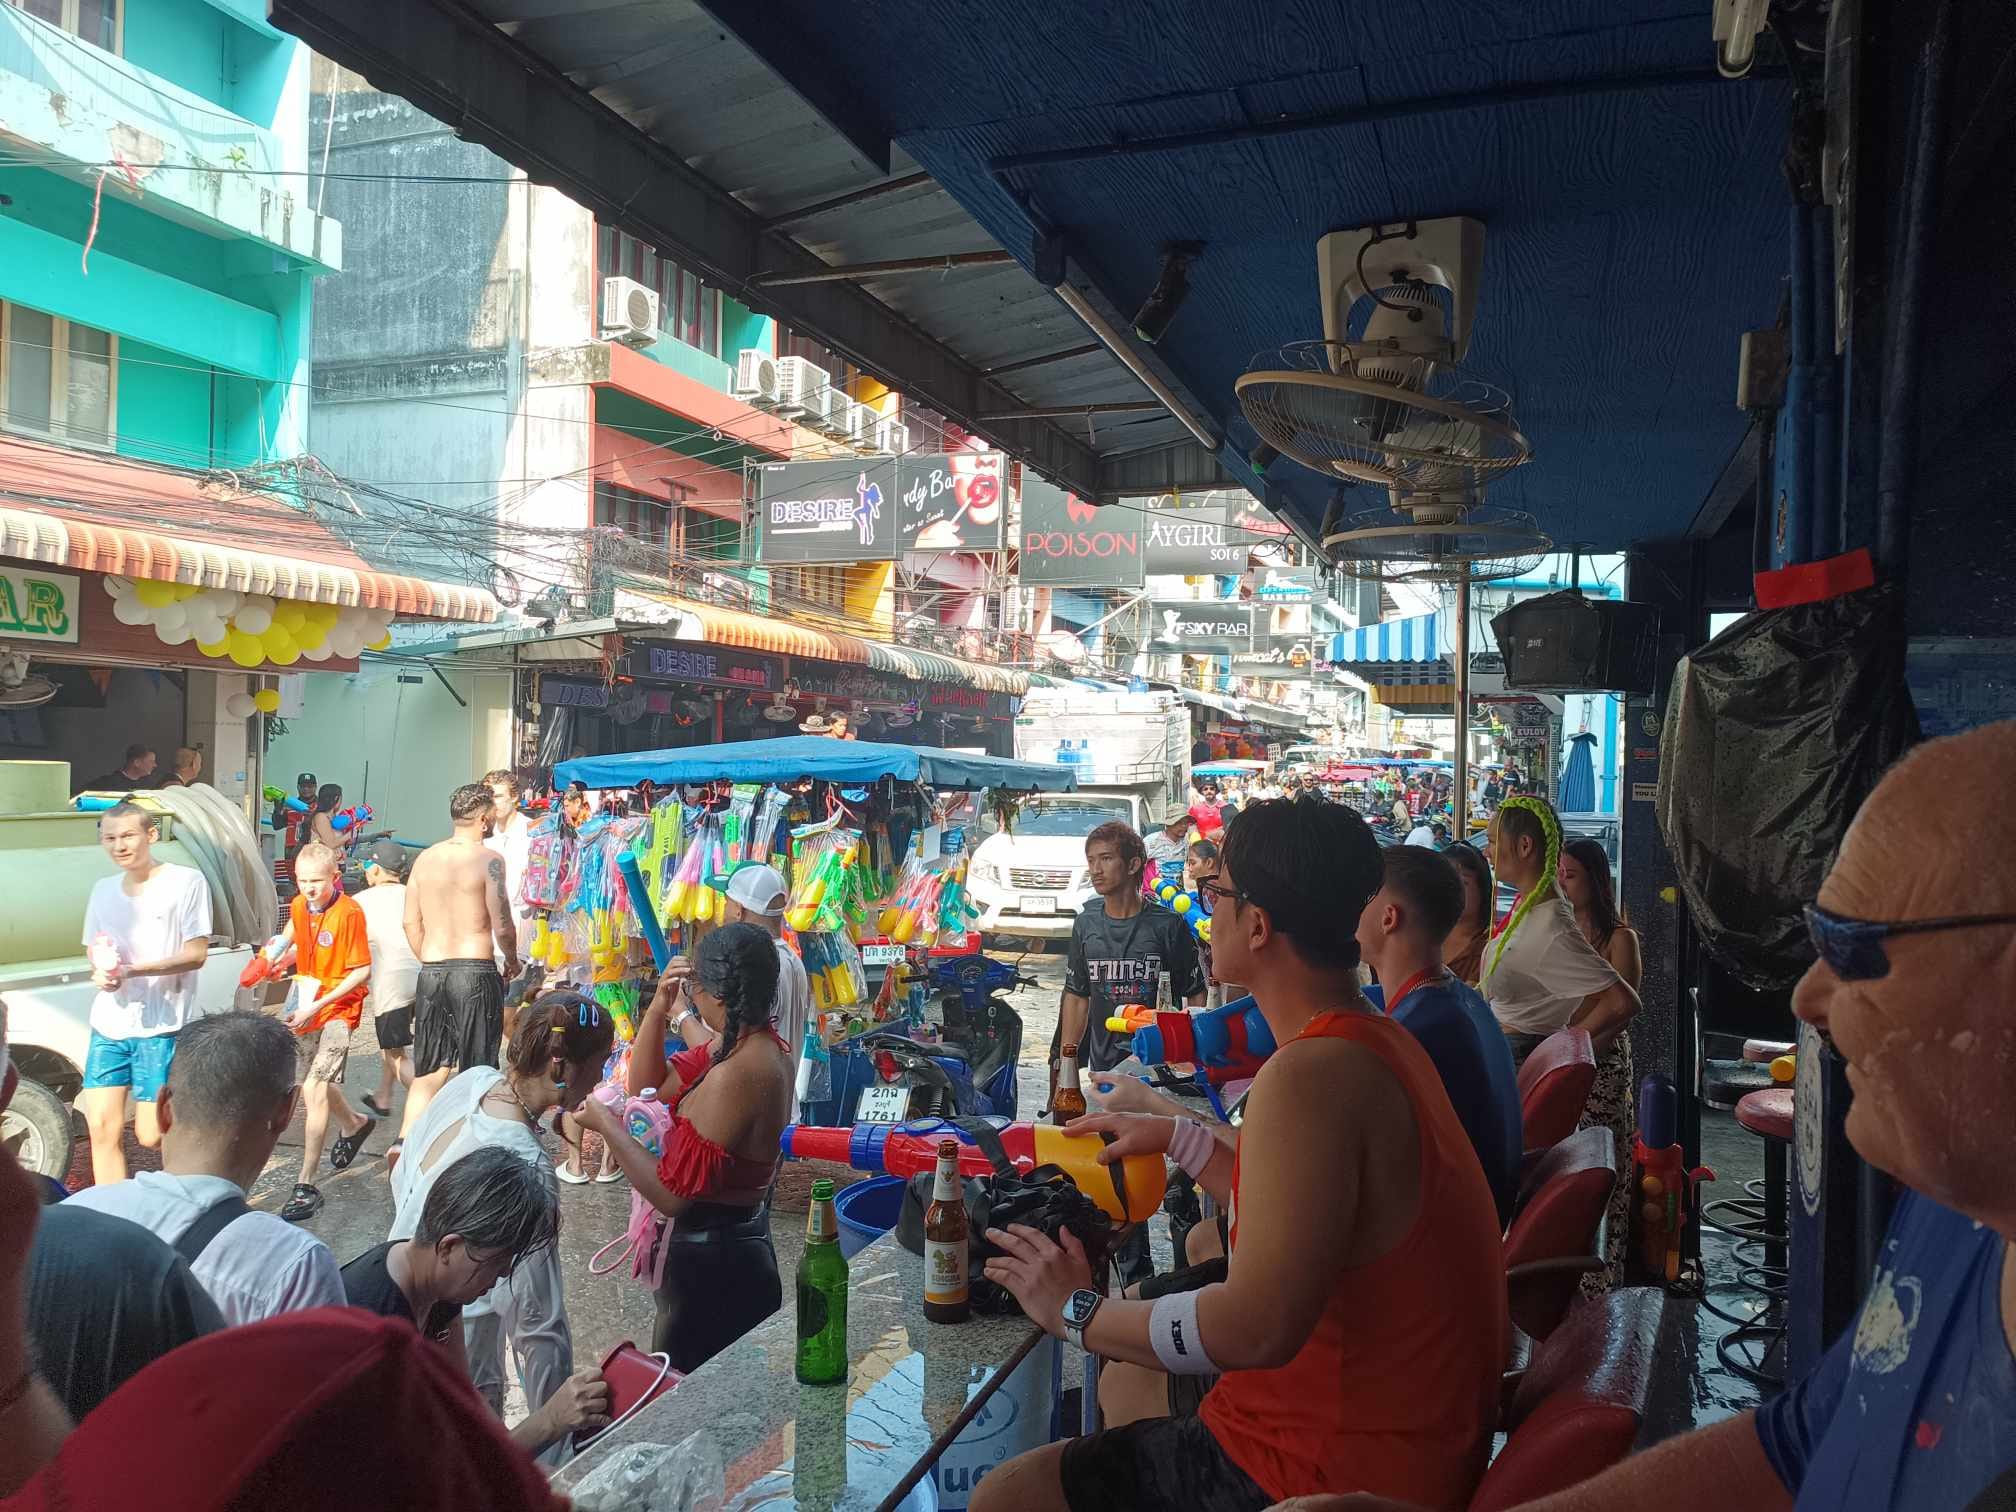 Soi Buakhao during Songkran. Soi Buakhao is located between South Pattaya and Central Pattaya roads.